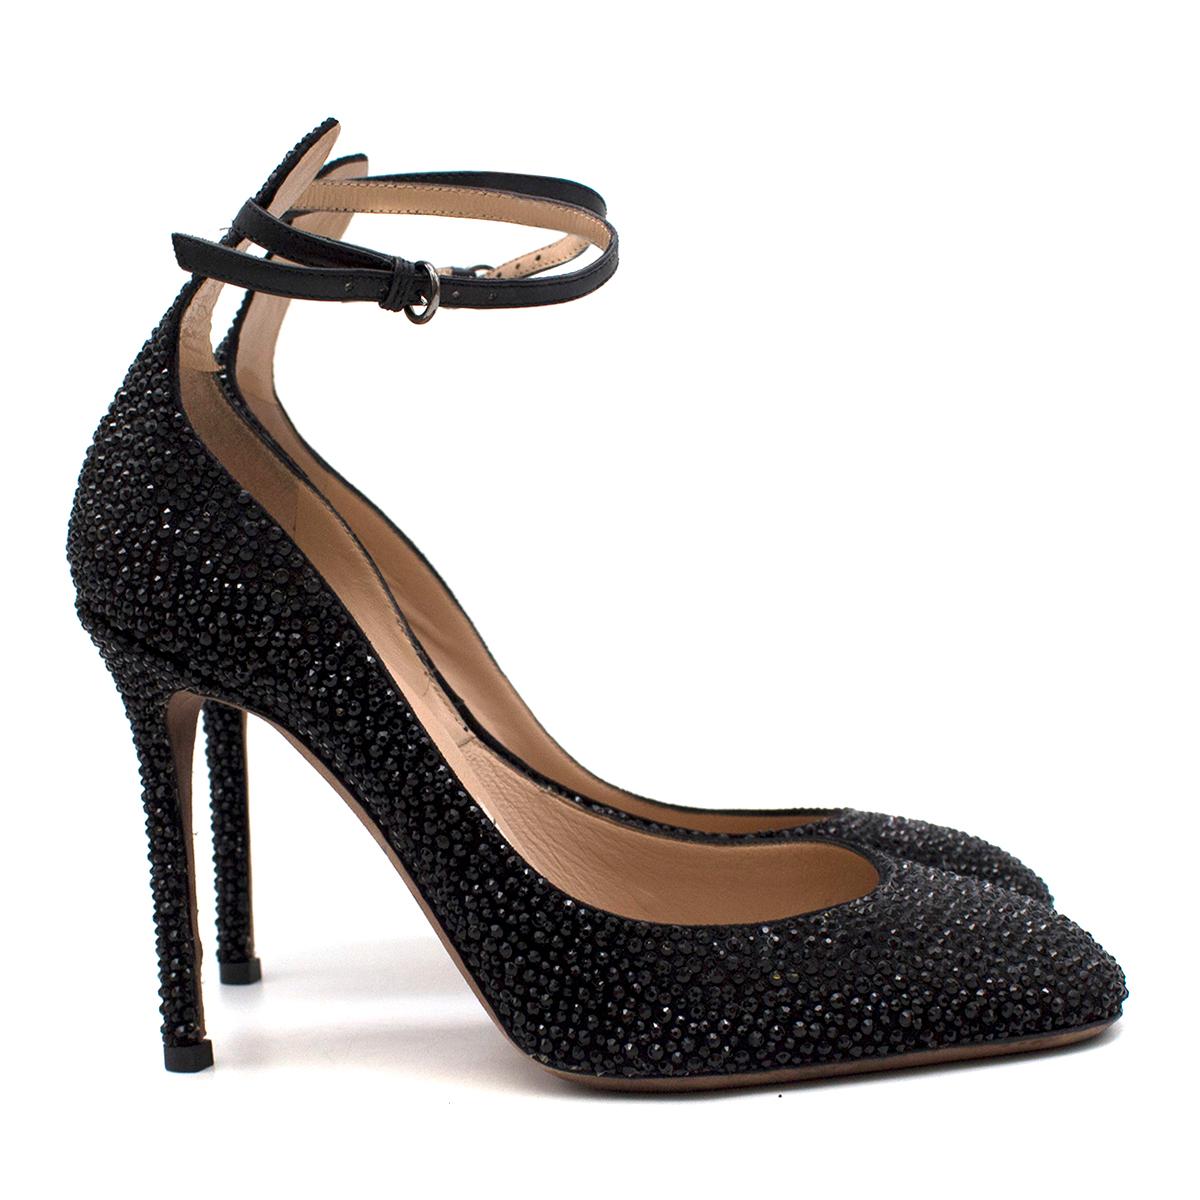 Valentino Garavani Black Crystal Embellished Pumps 

- Black pumps
- Stiletto heel
- Round toe
- Black leather ankle buckle strap 
- Black crystal embellishment
- Nude leather insole & sole.

This item comes with the box. 

Please note, these items